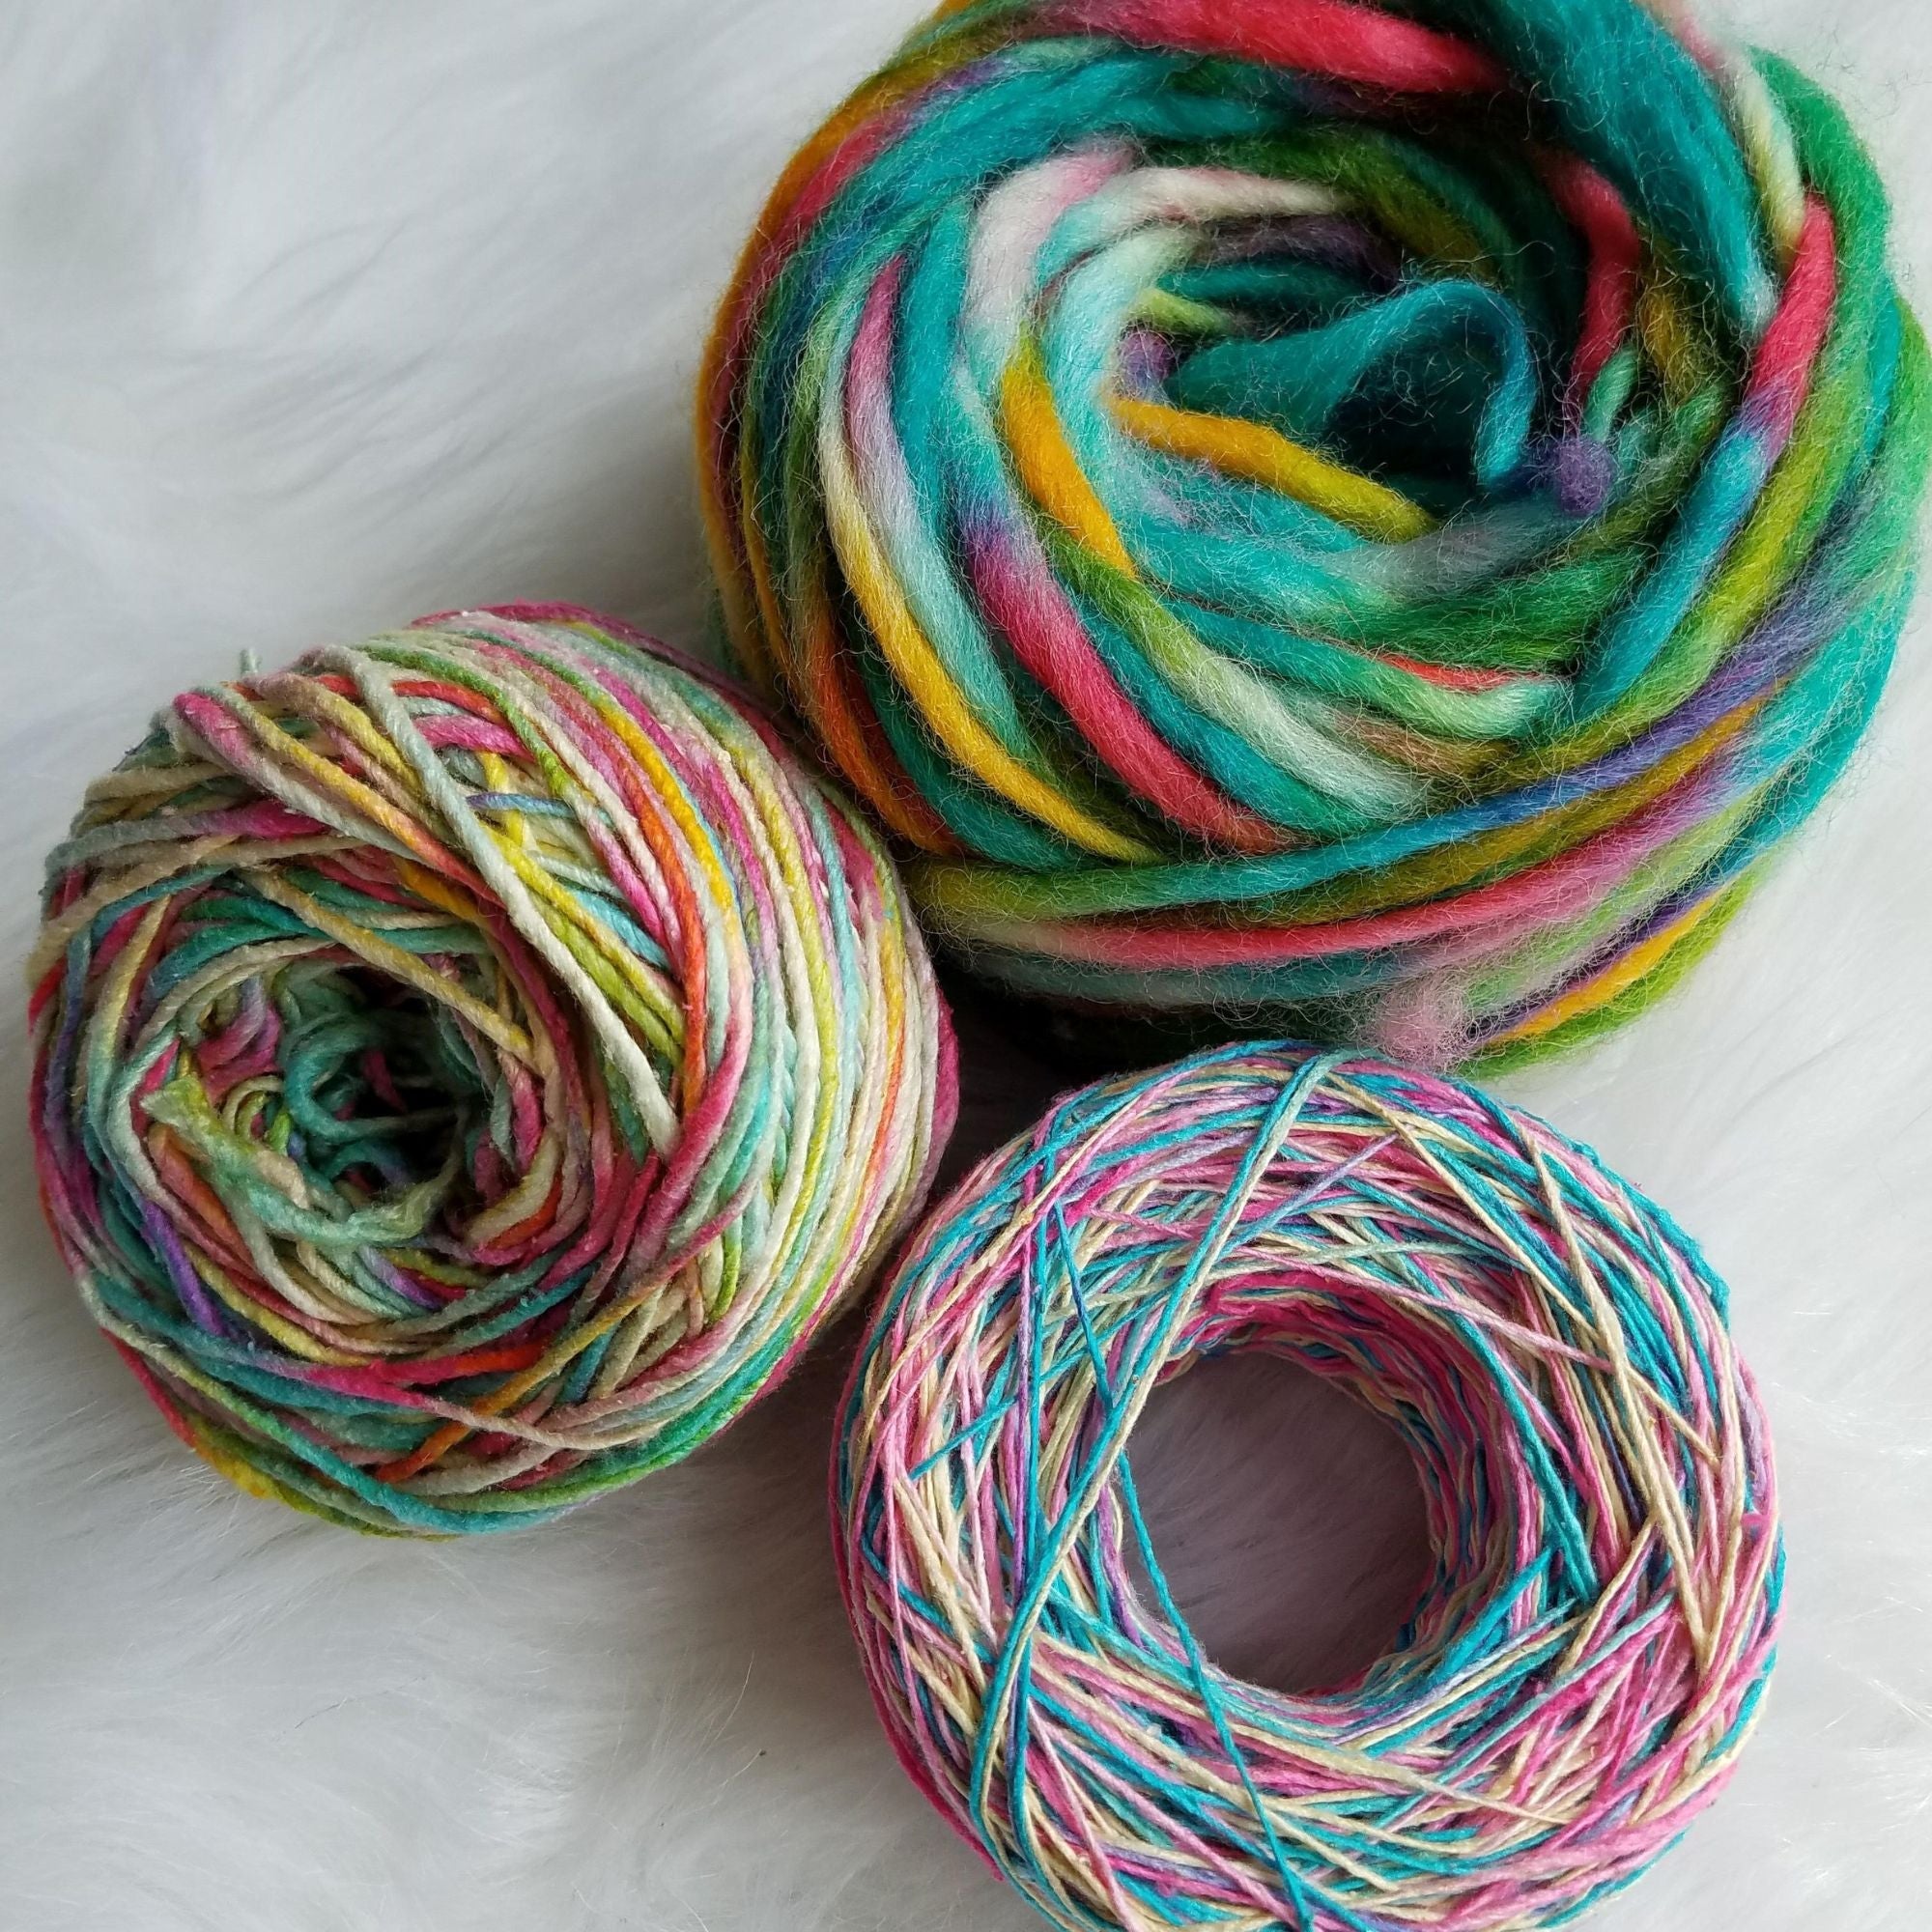 Clearance Sale!!!Colorful Dye Neckerchief Hand-Knitted Yarn For